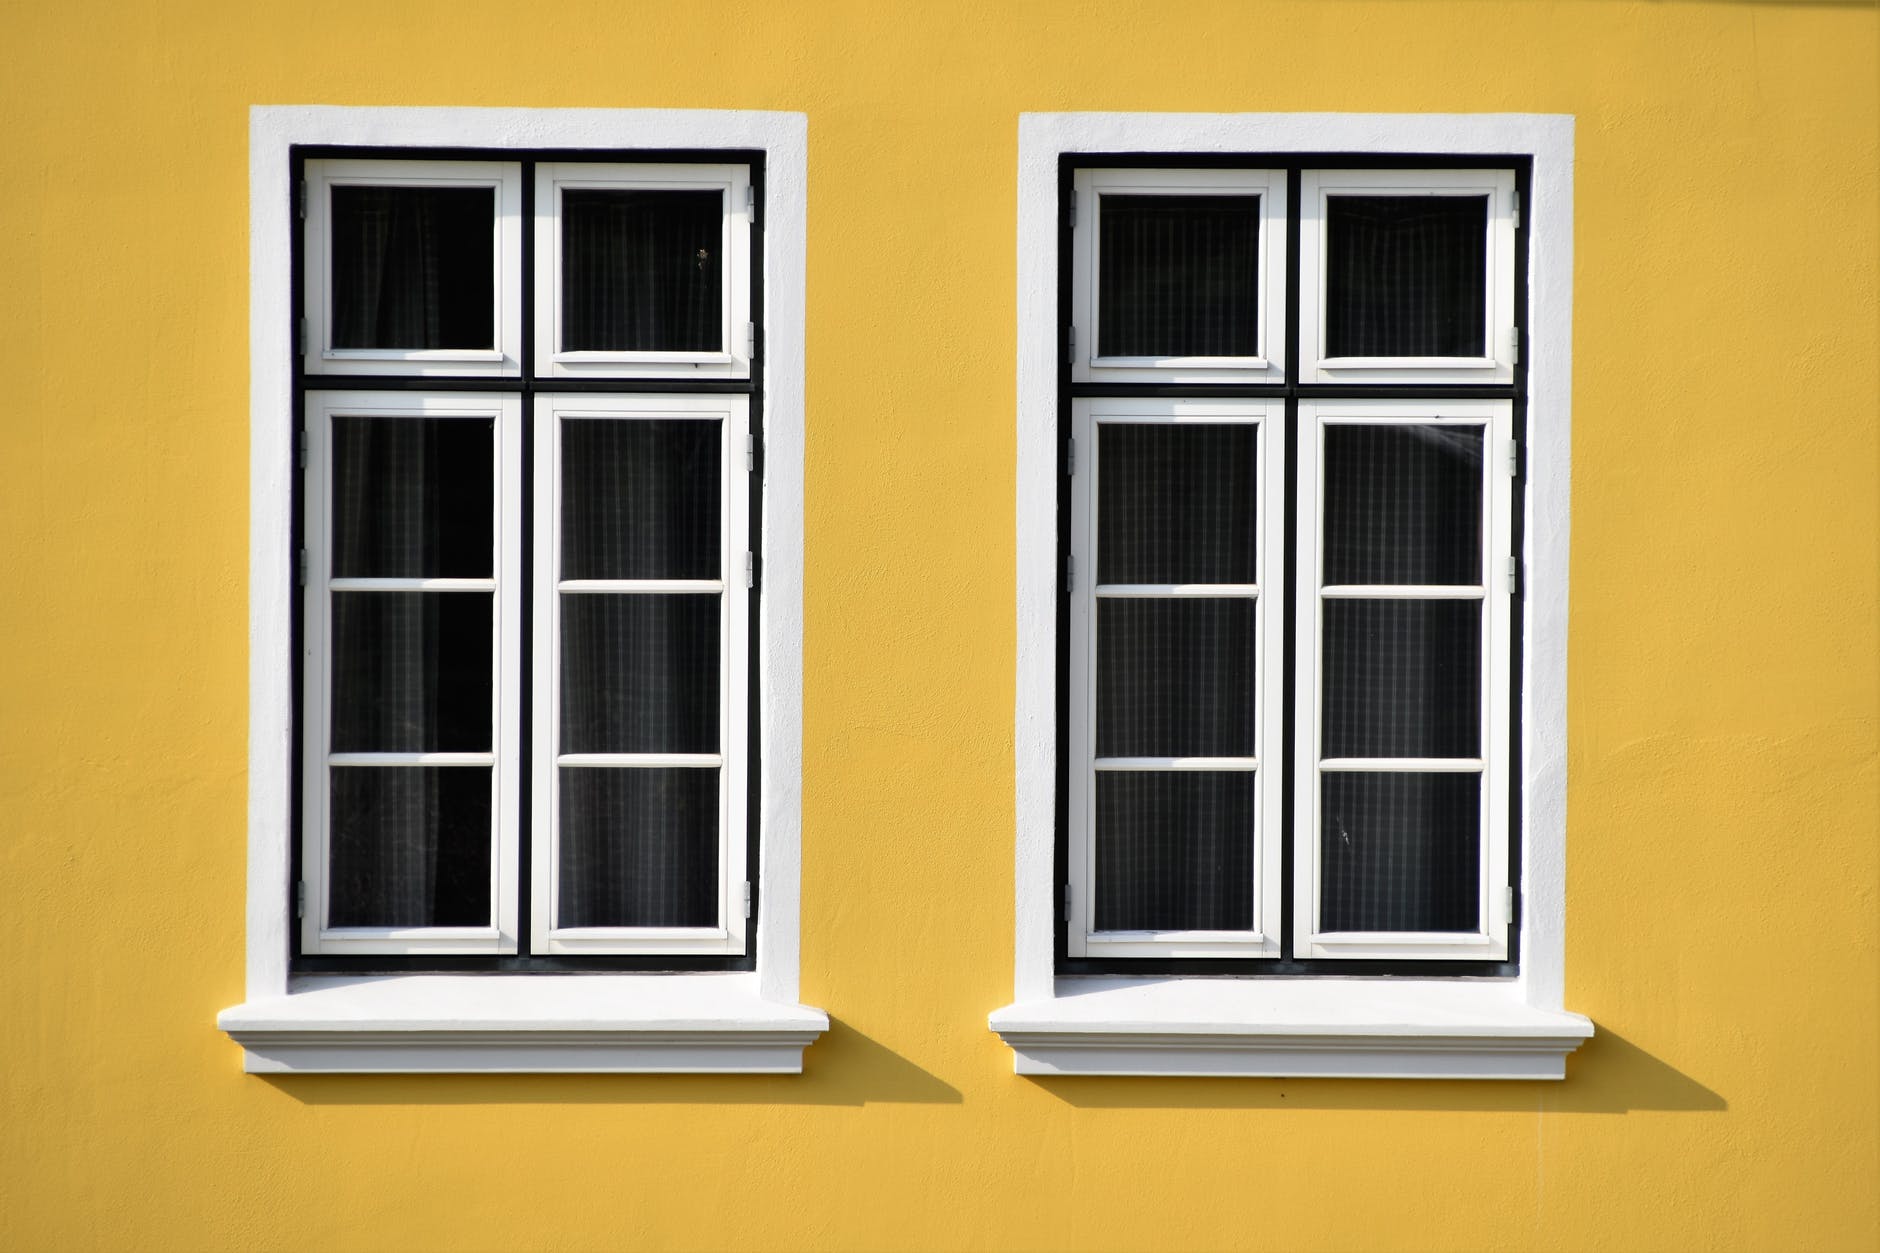 4 Things to Consider When Switching to Energy-Efficient Windows